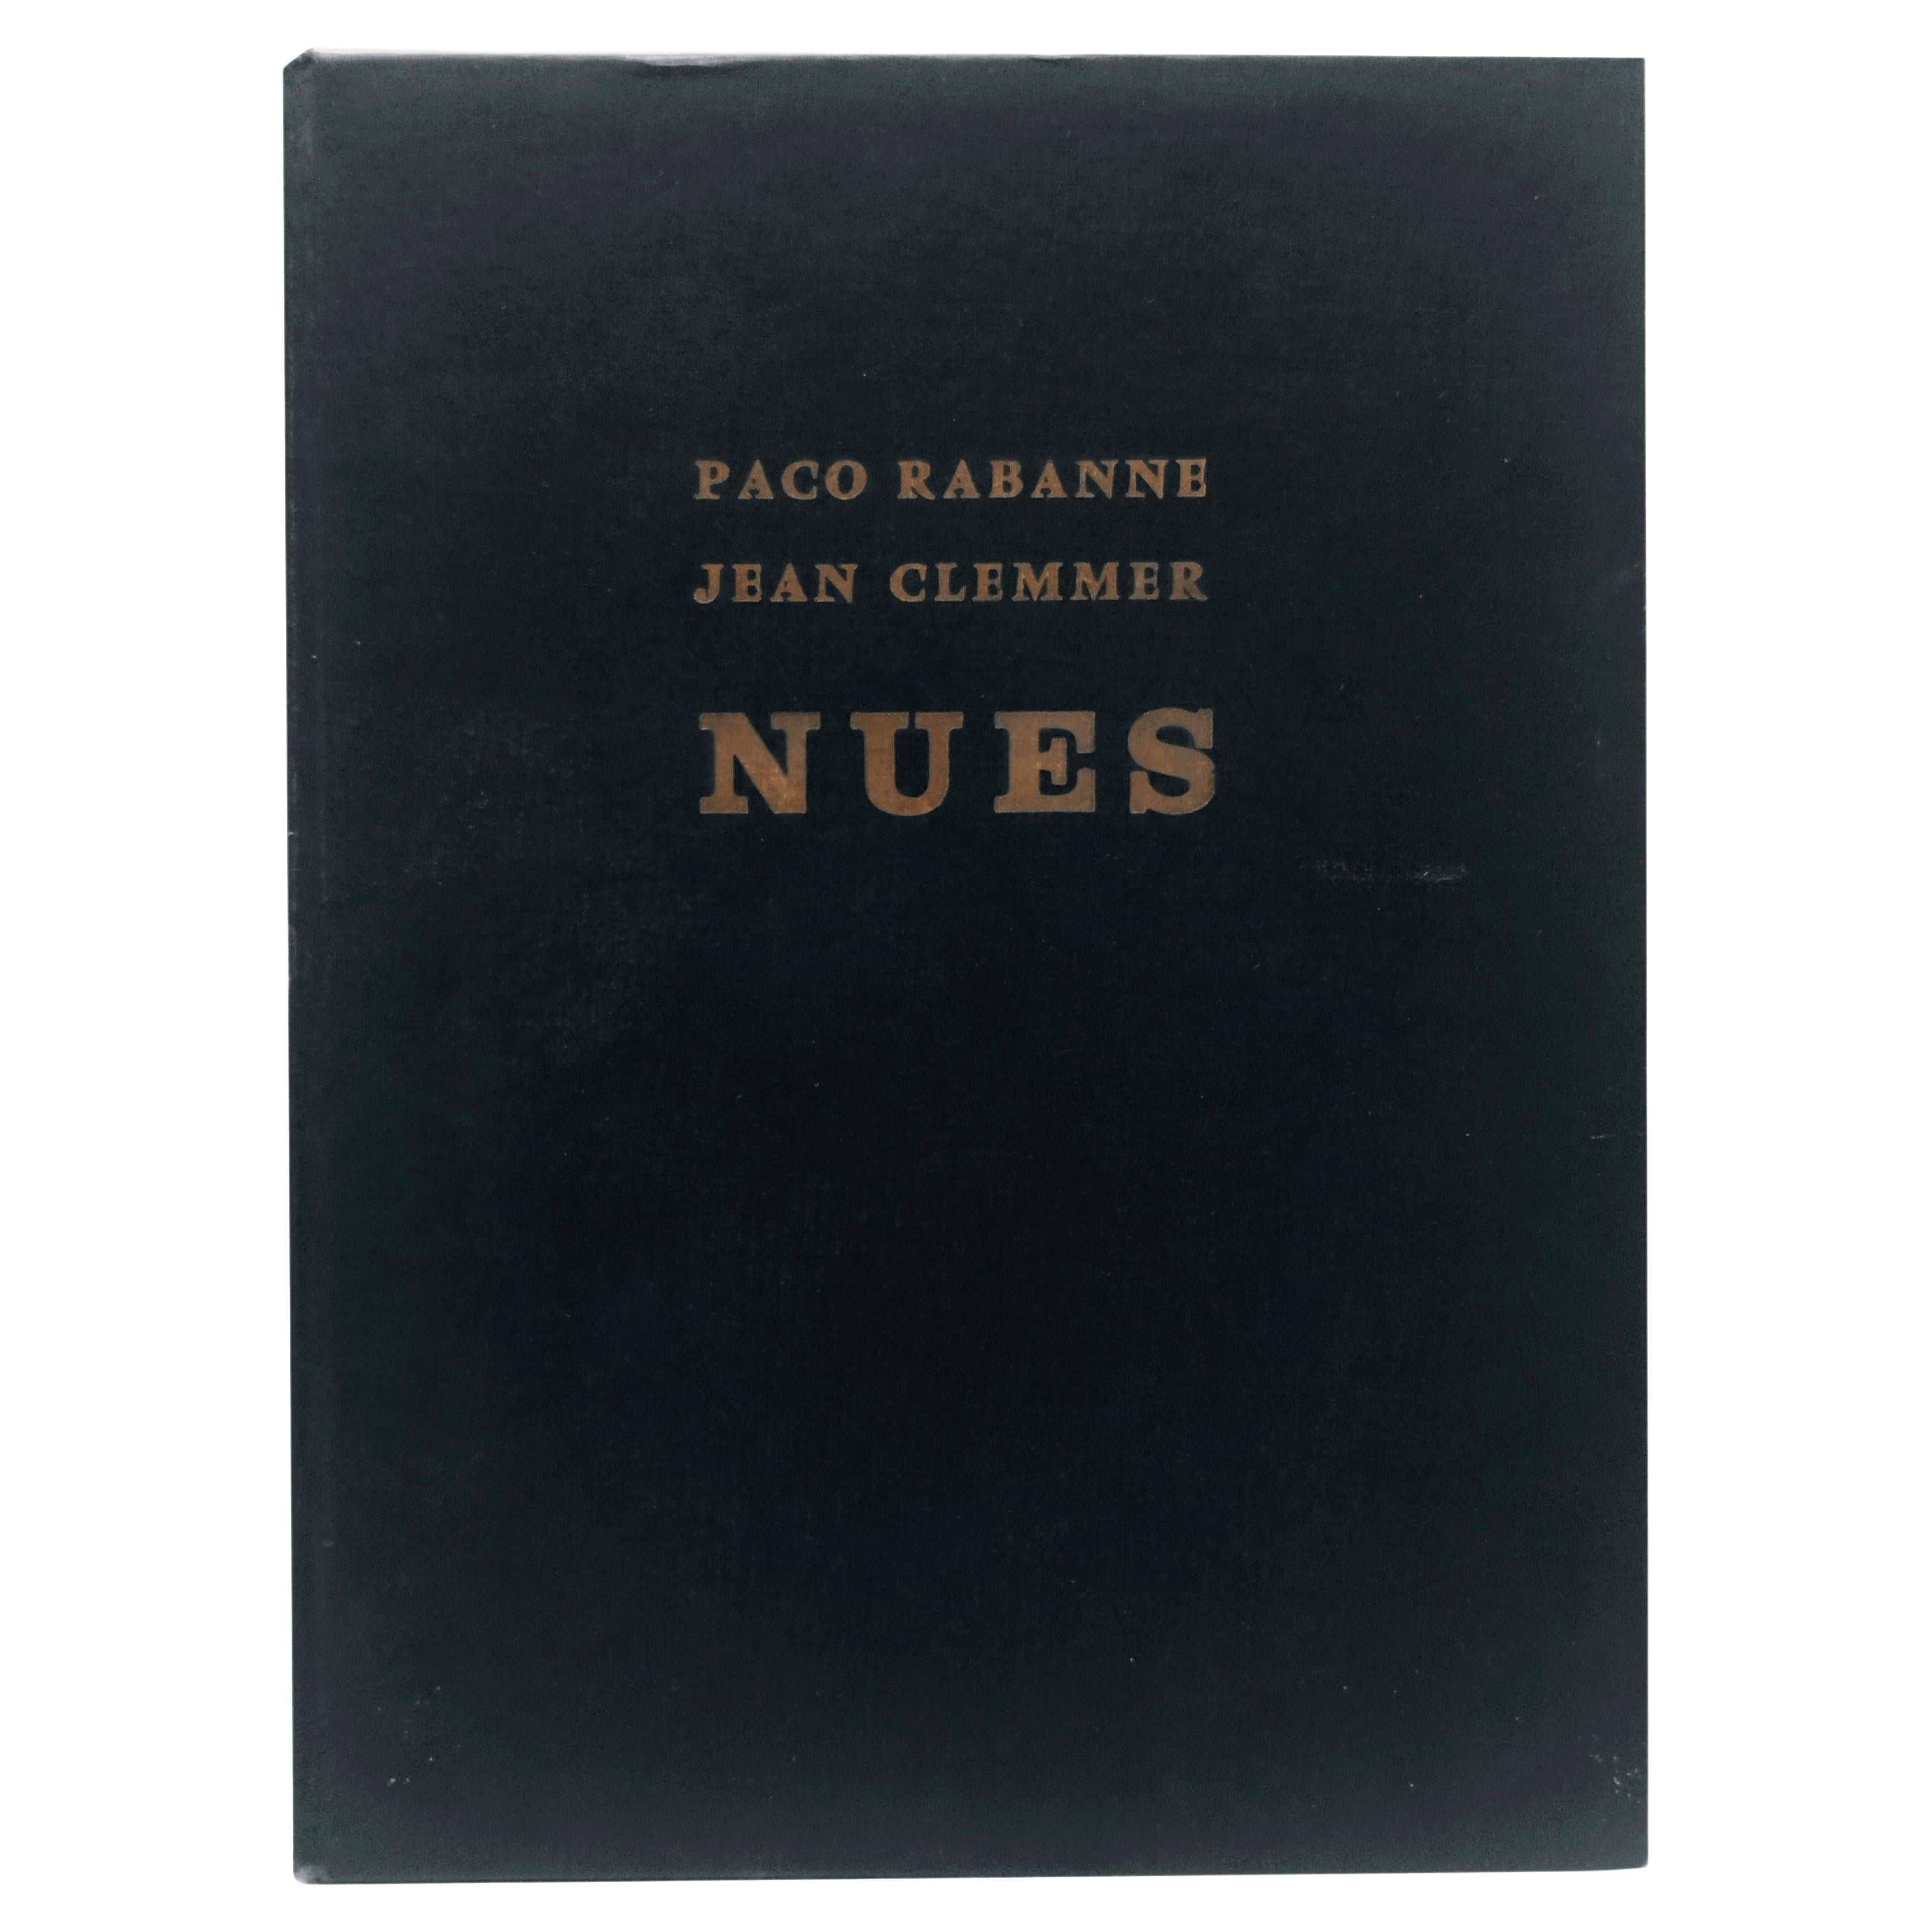 Paco Rabanne & Jean Clemmer "NUES" Book, France 1969